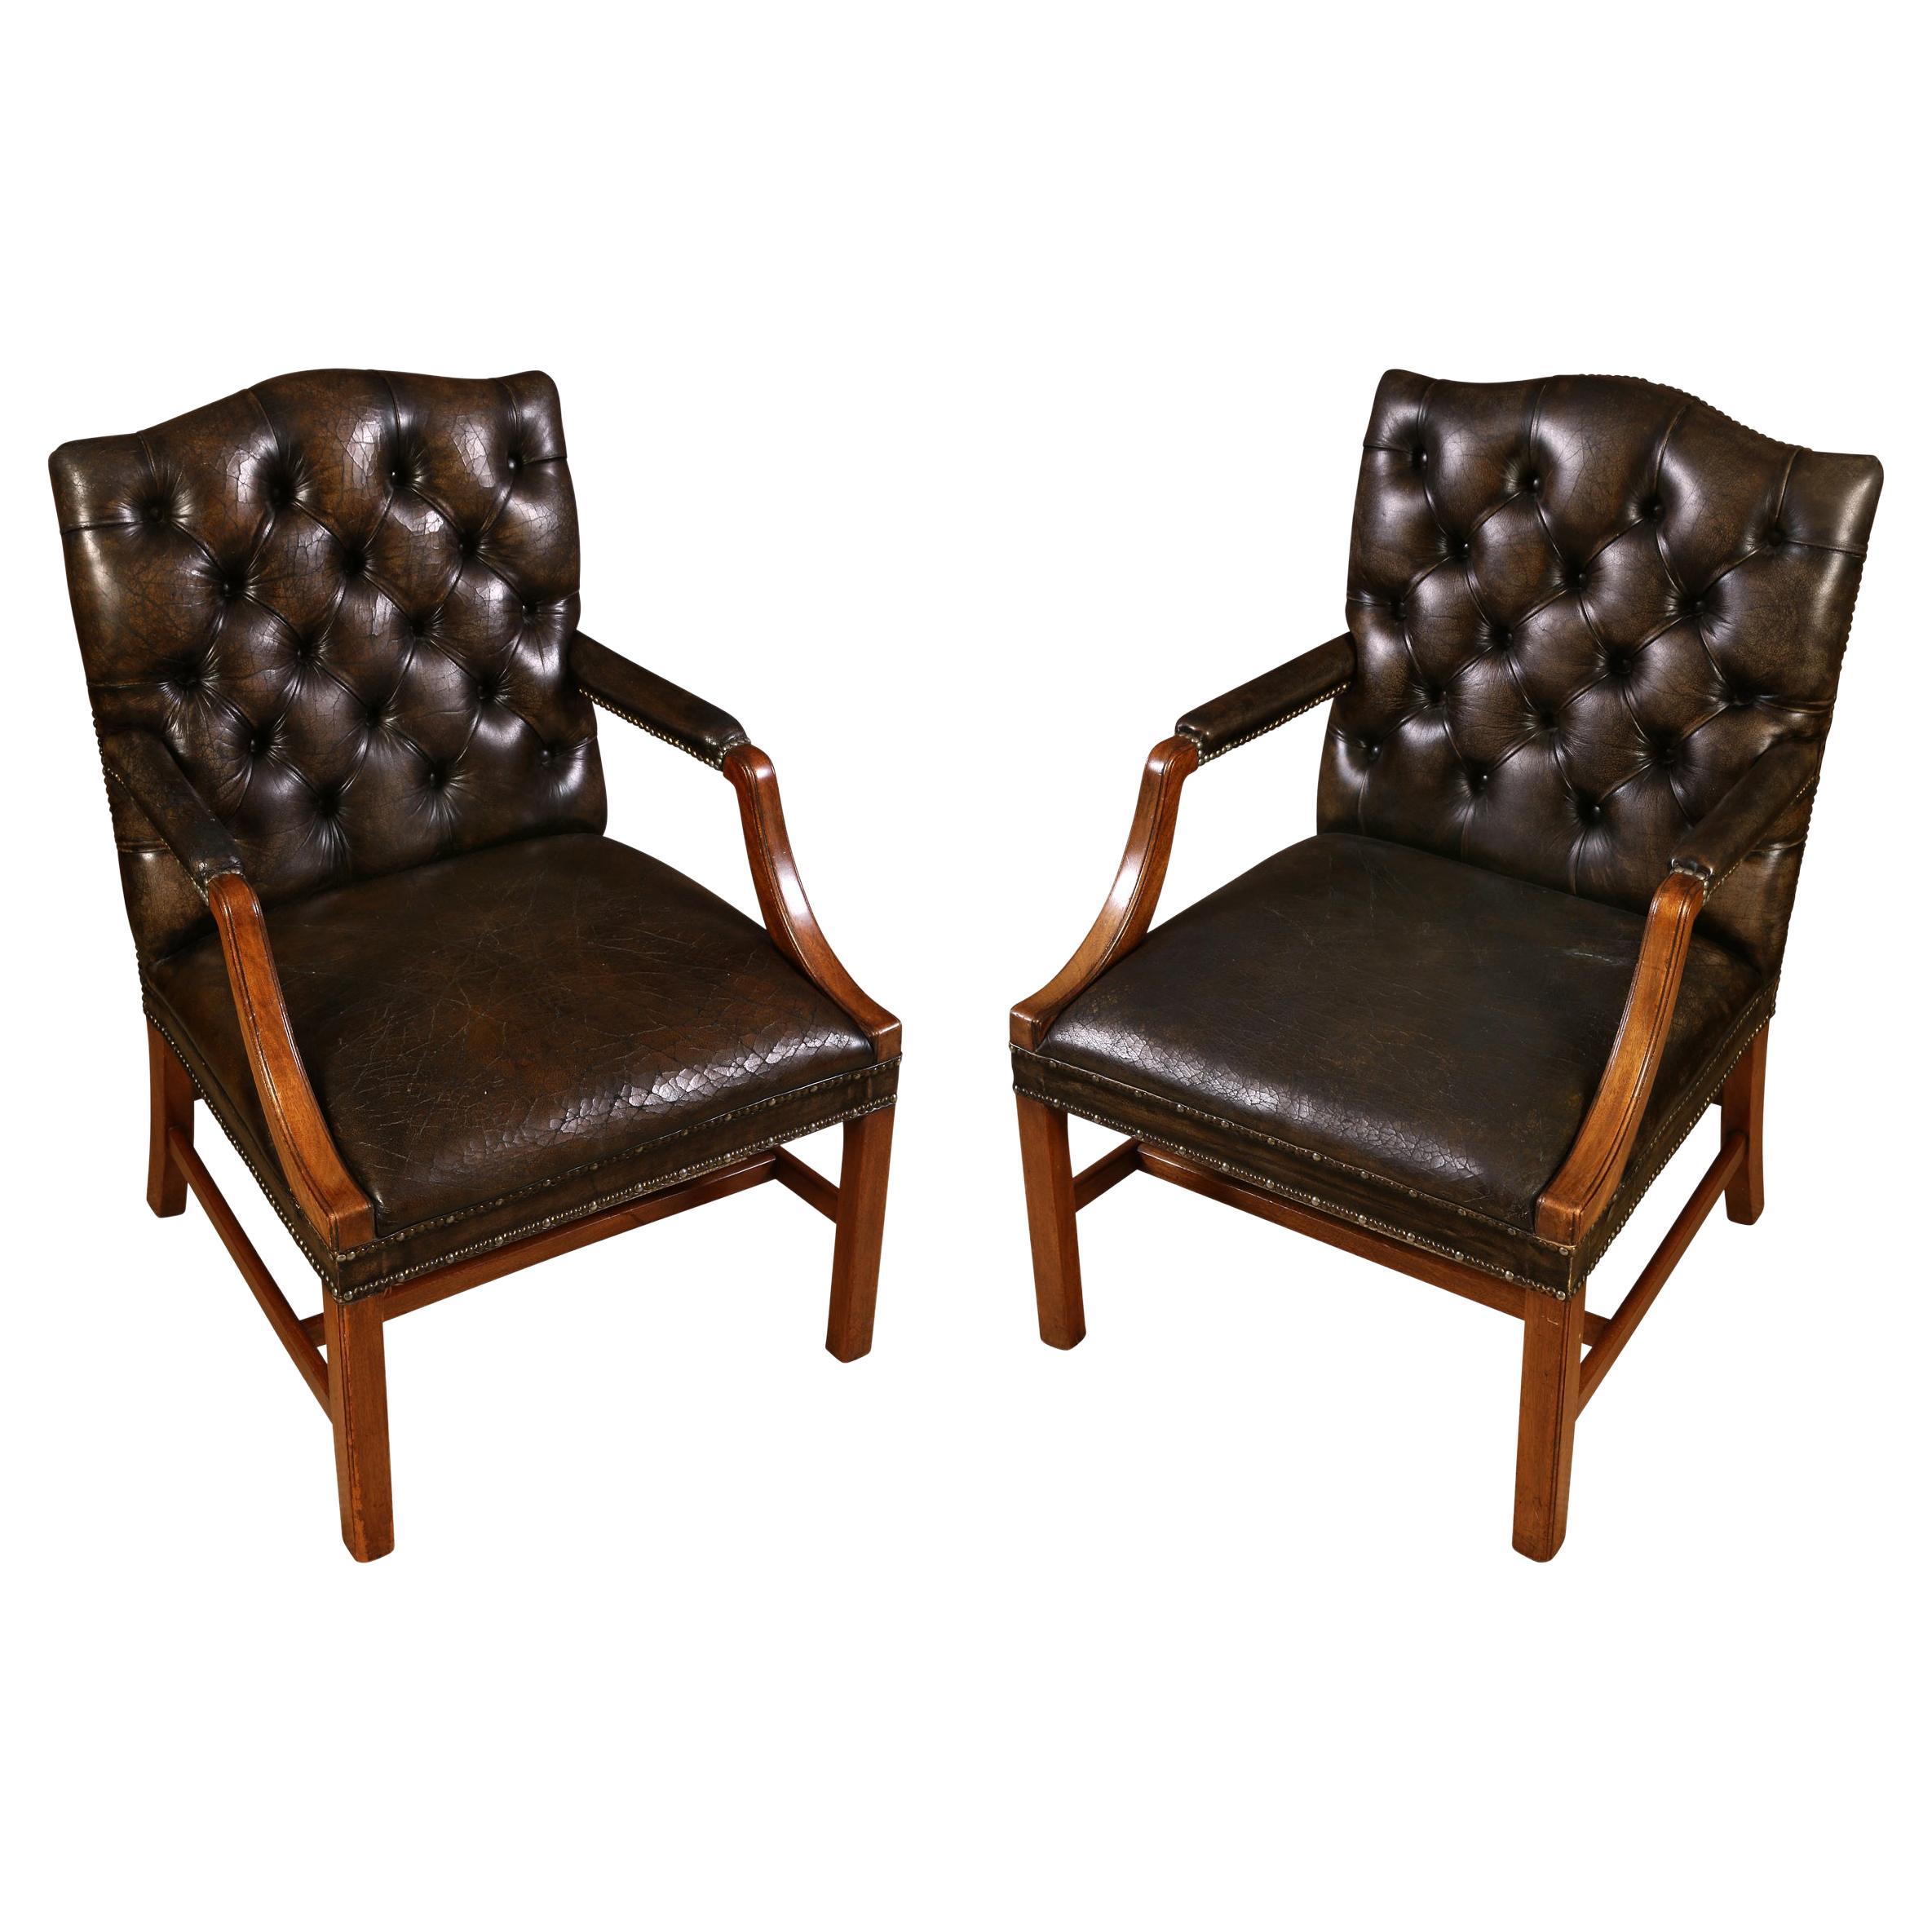 Pair of Vintage Georgian Patinated Leather Tufted Arm Chairs